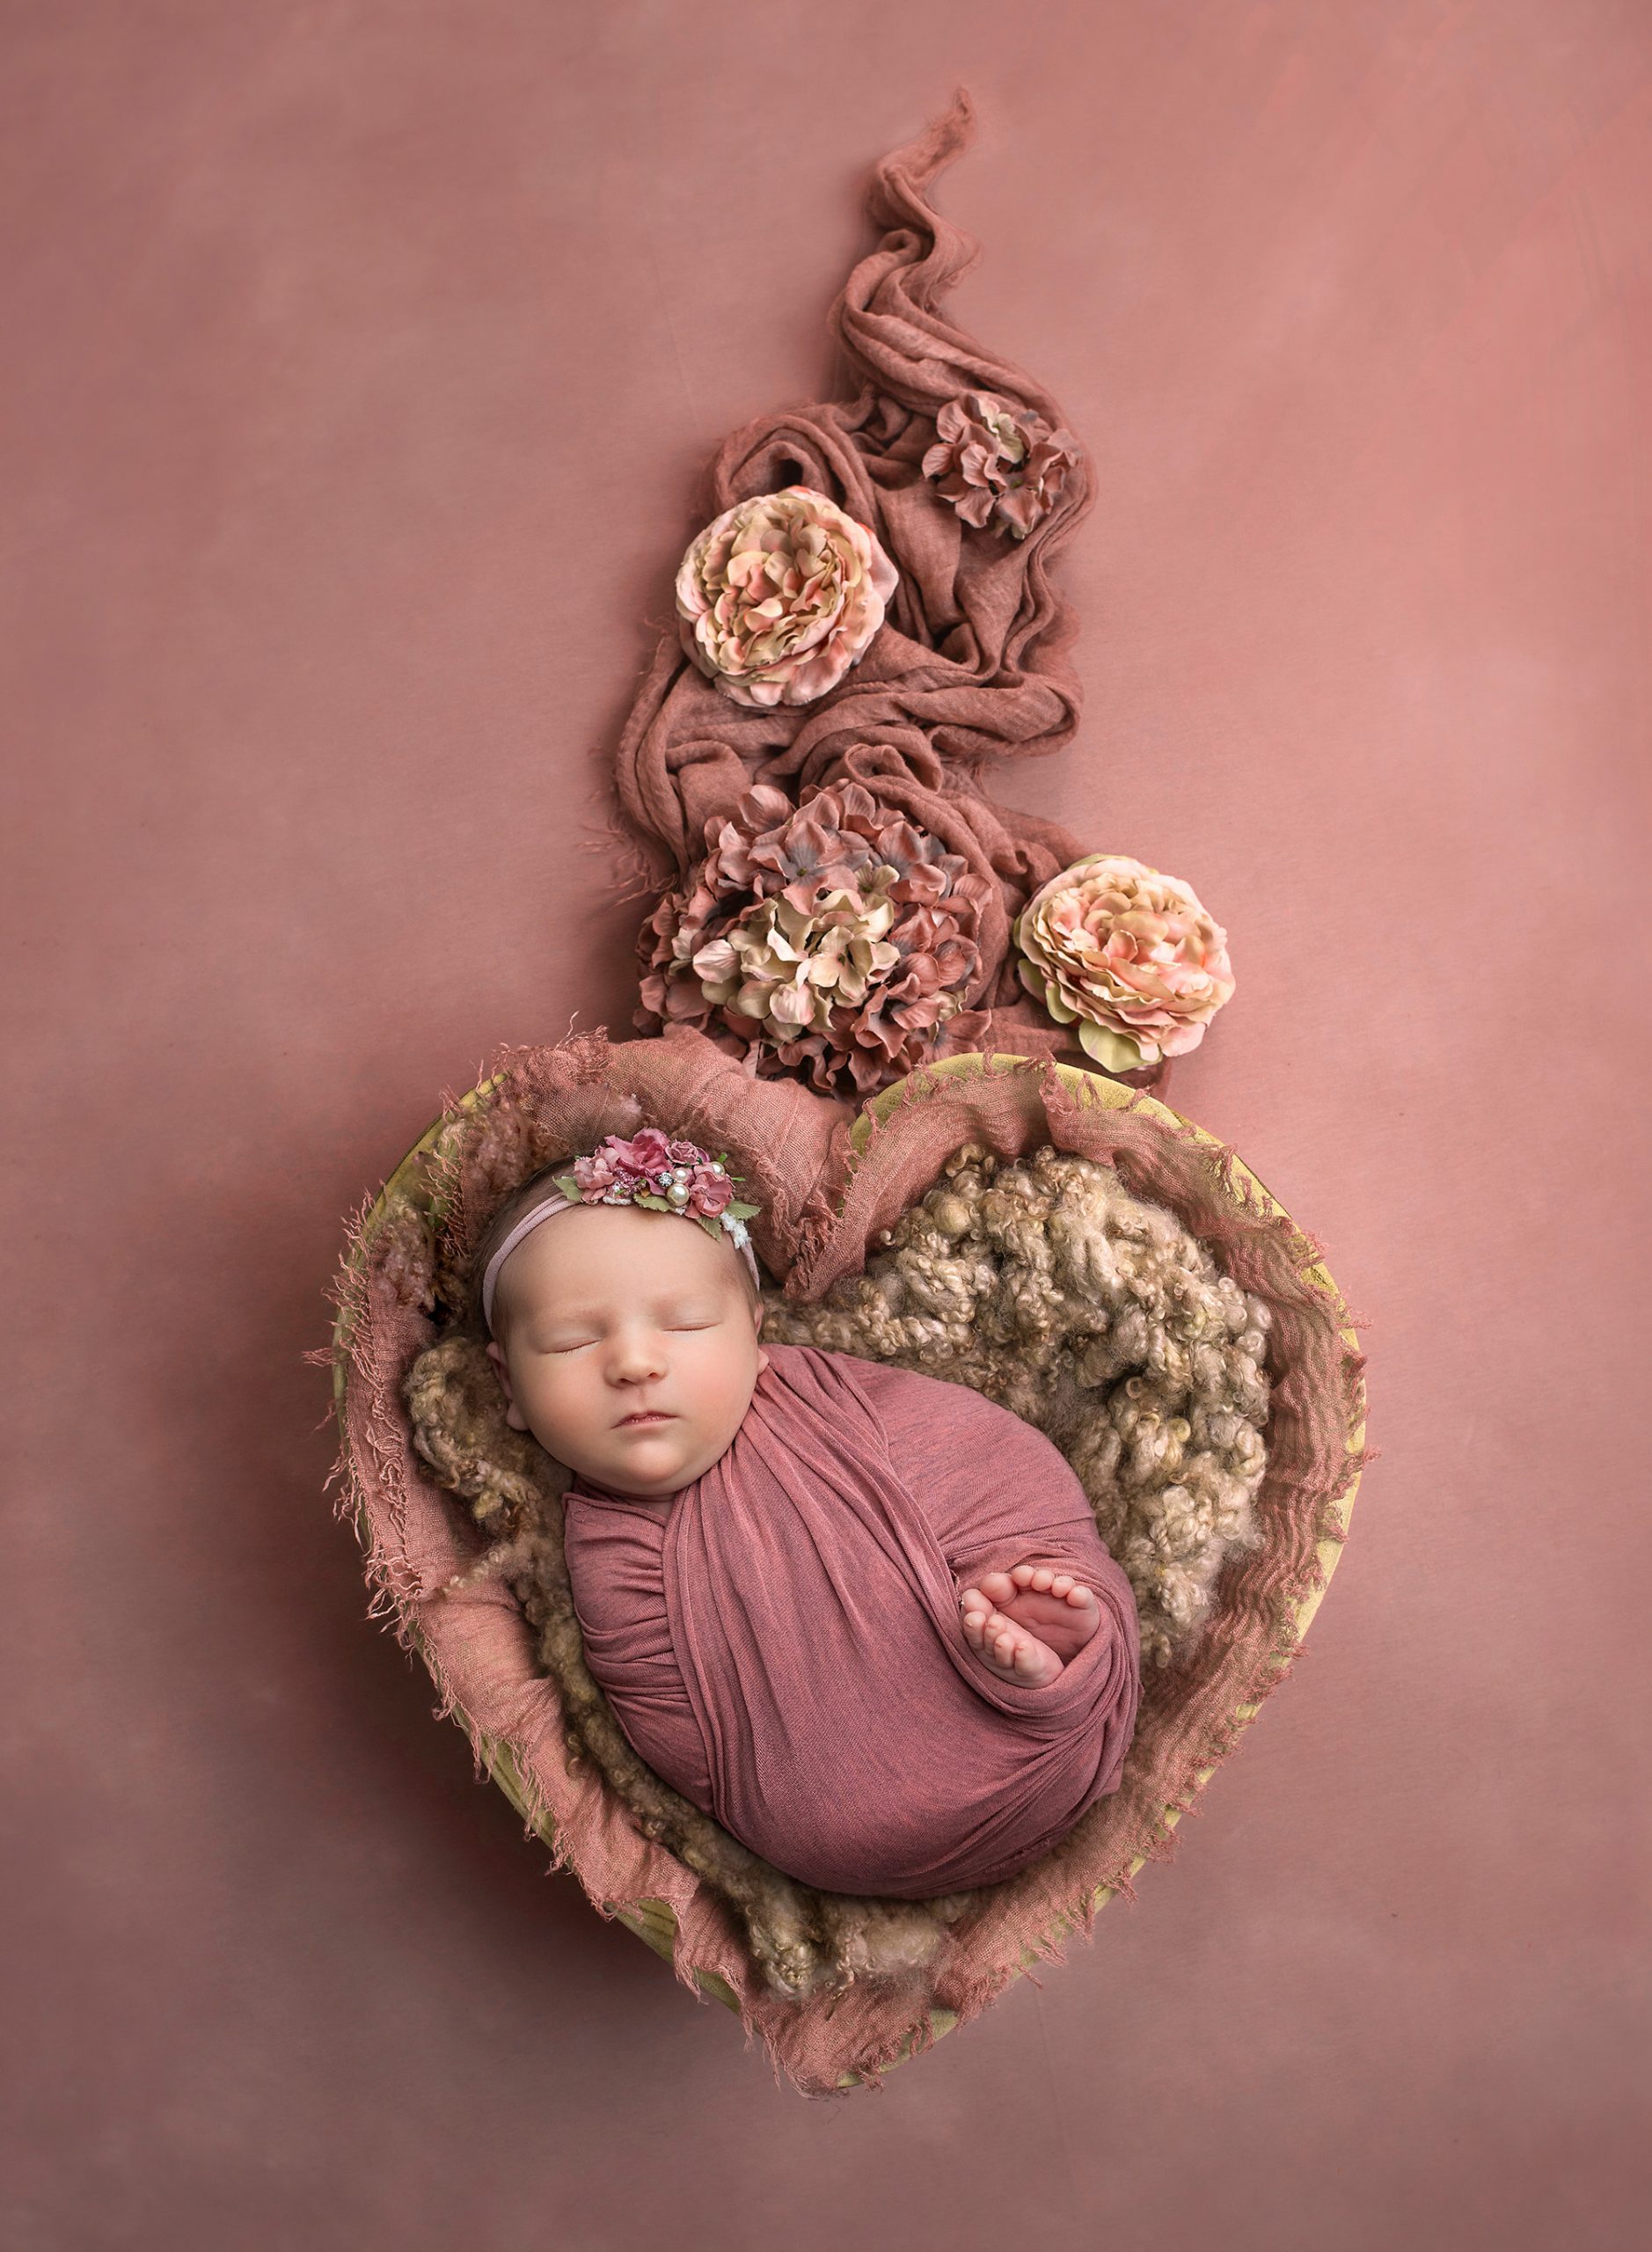 newborn baby girl asleep in mauve wrap laying inside heart basket with flowers